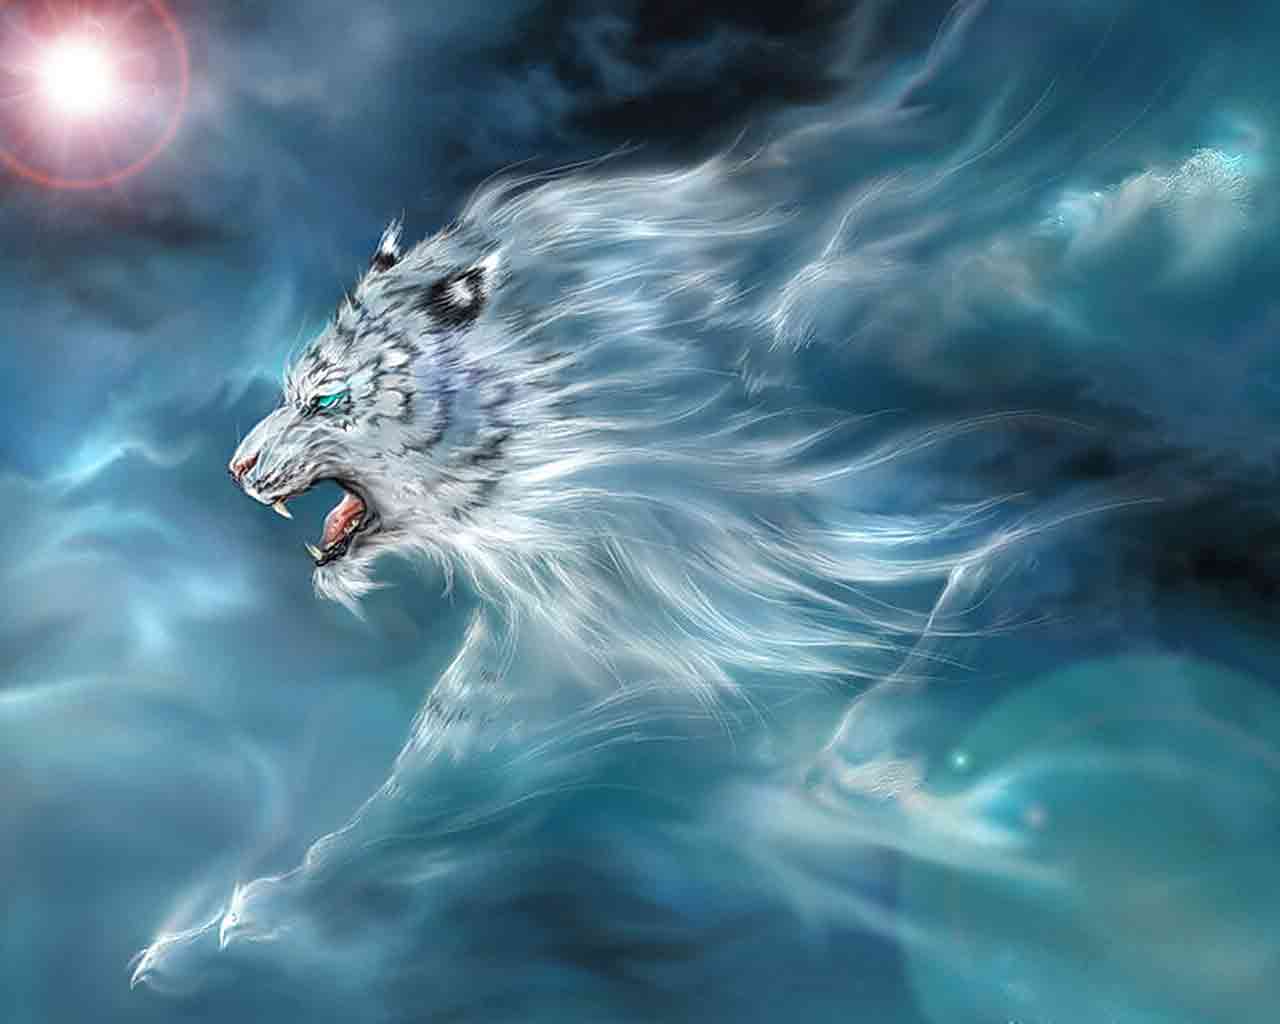 A white tiger in pursuit, mystically bound to the magic mist.